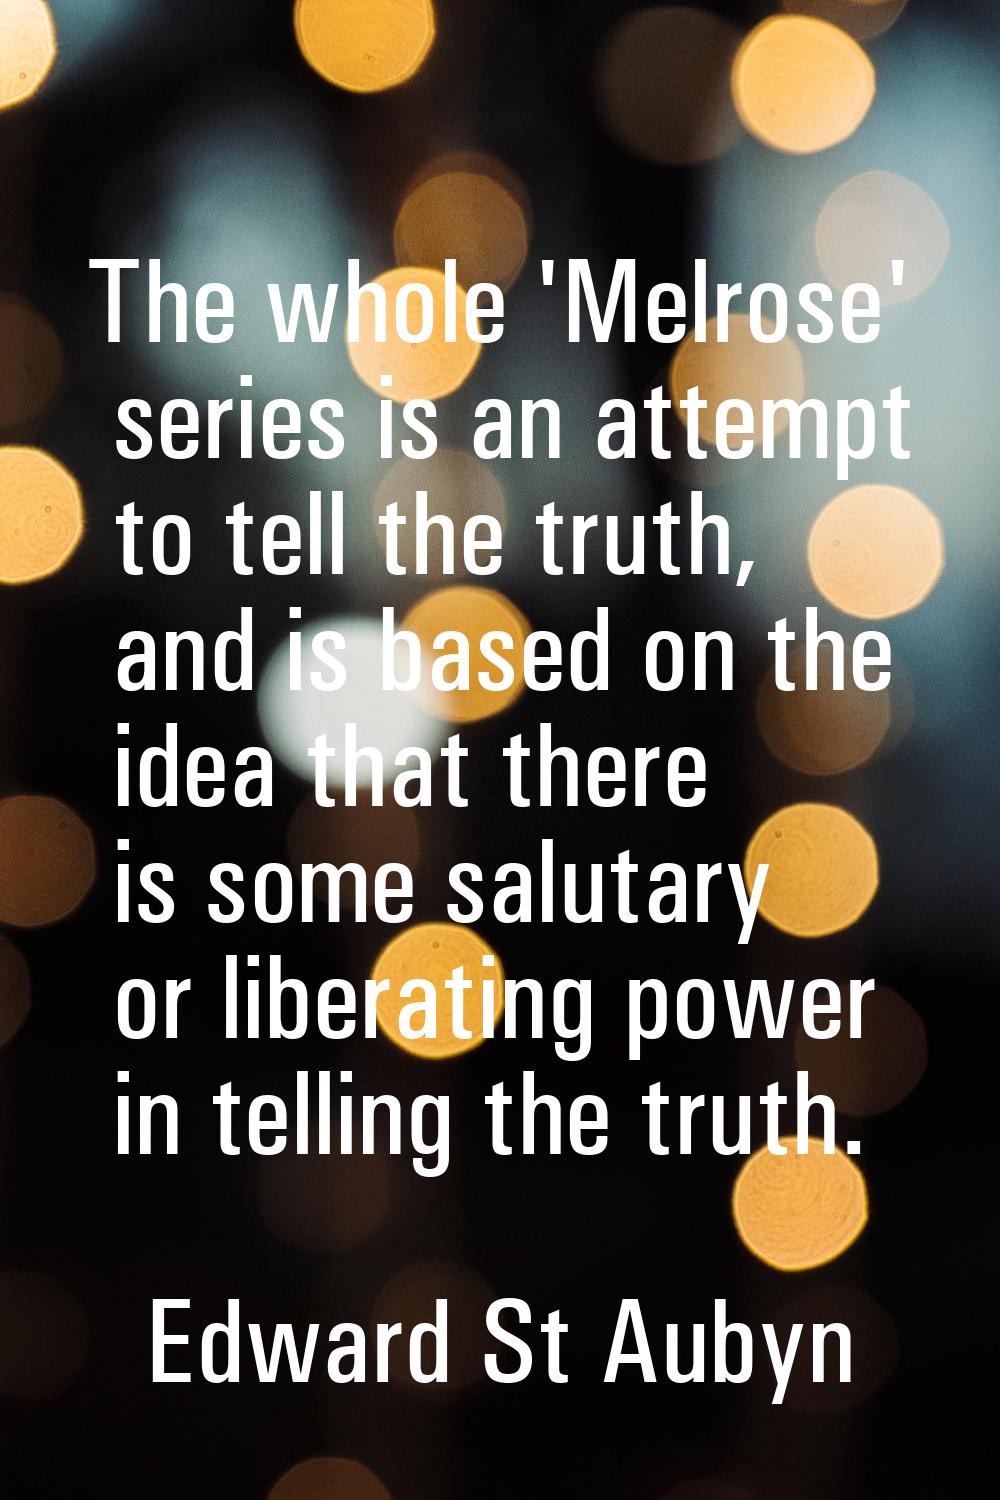 The whole 'Melrose' series is an attempt to tell the truth, and is based on the idea that there is 